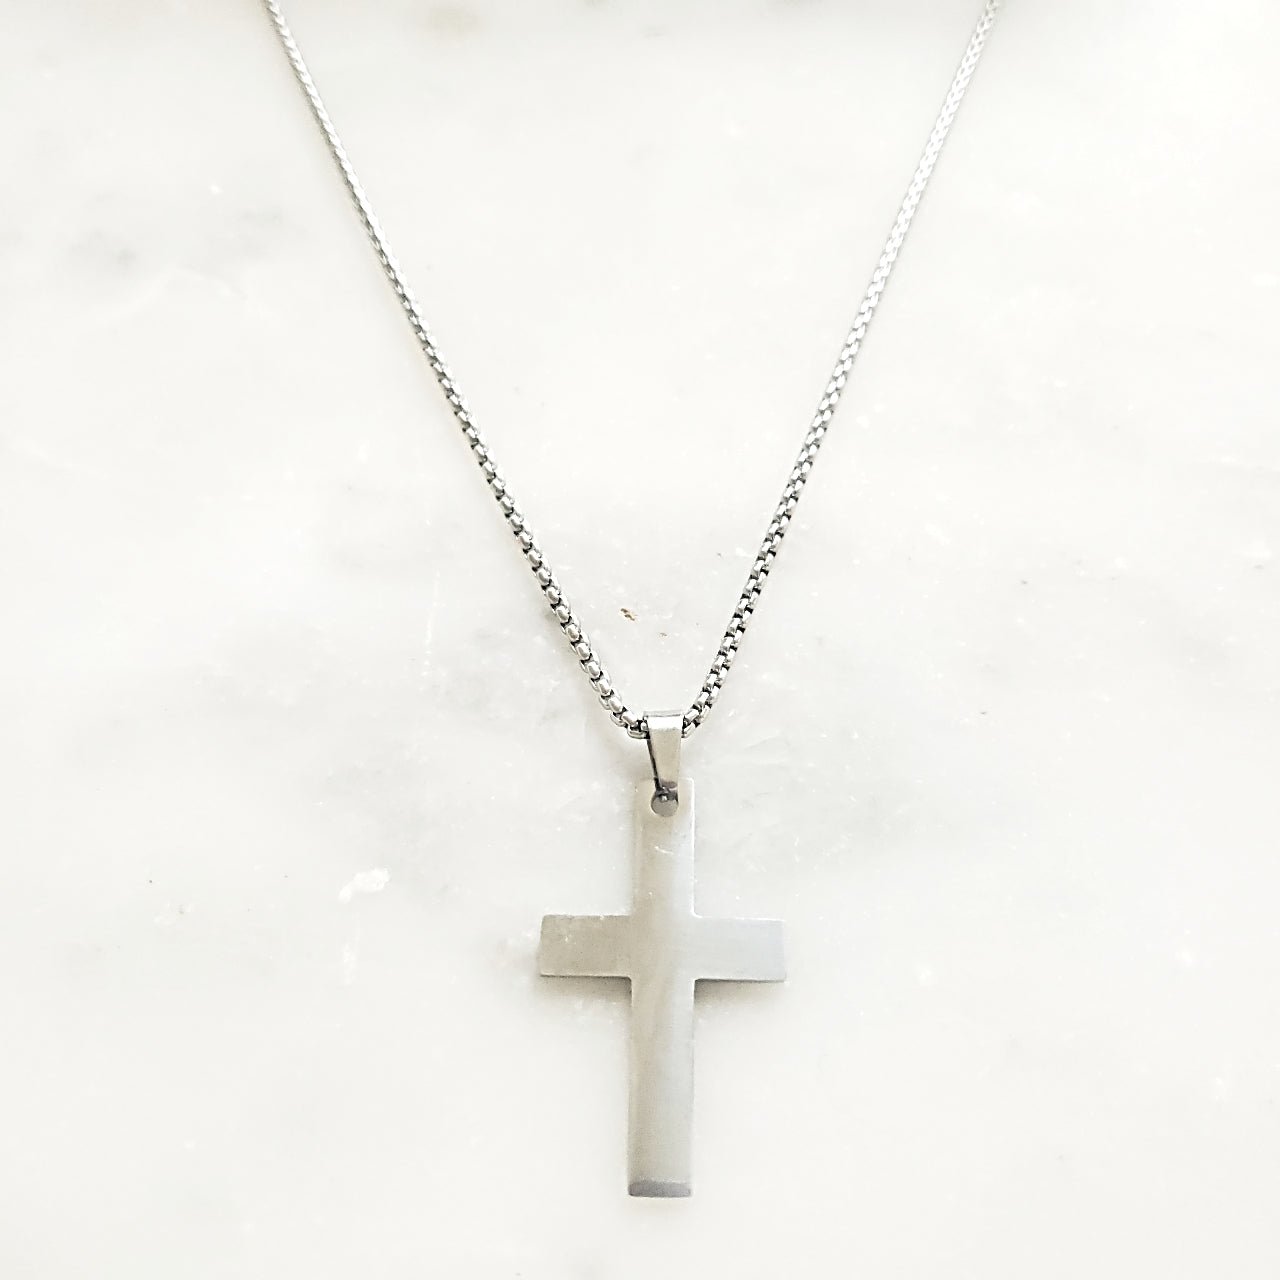 His Courage Cross Collection